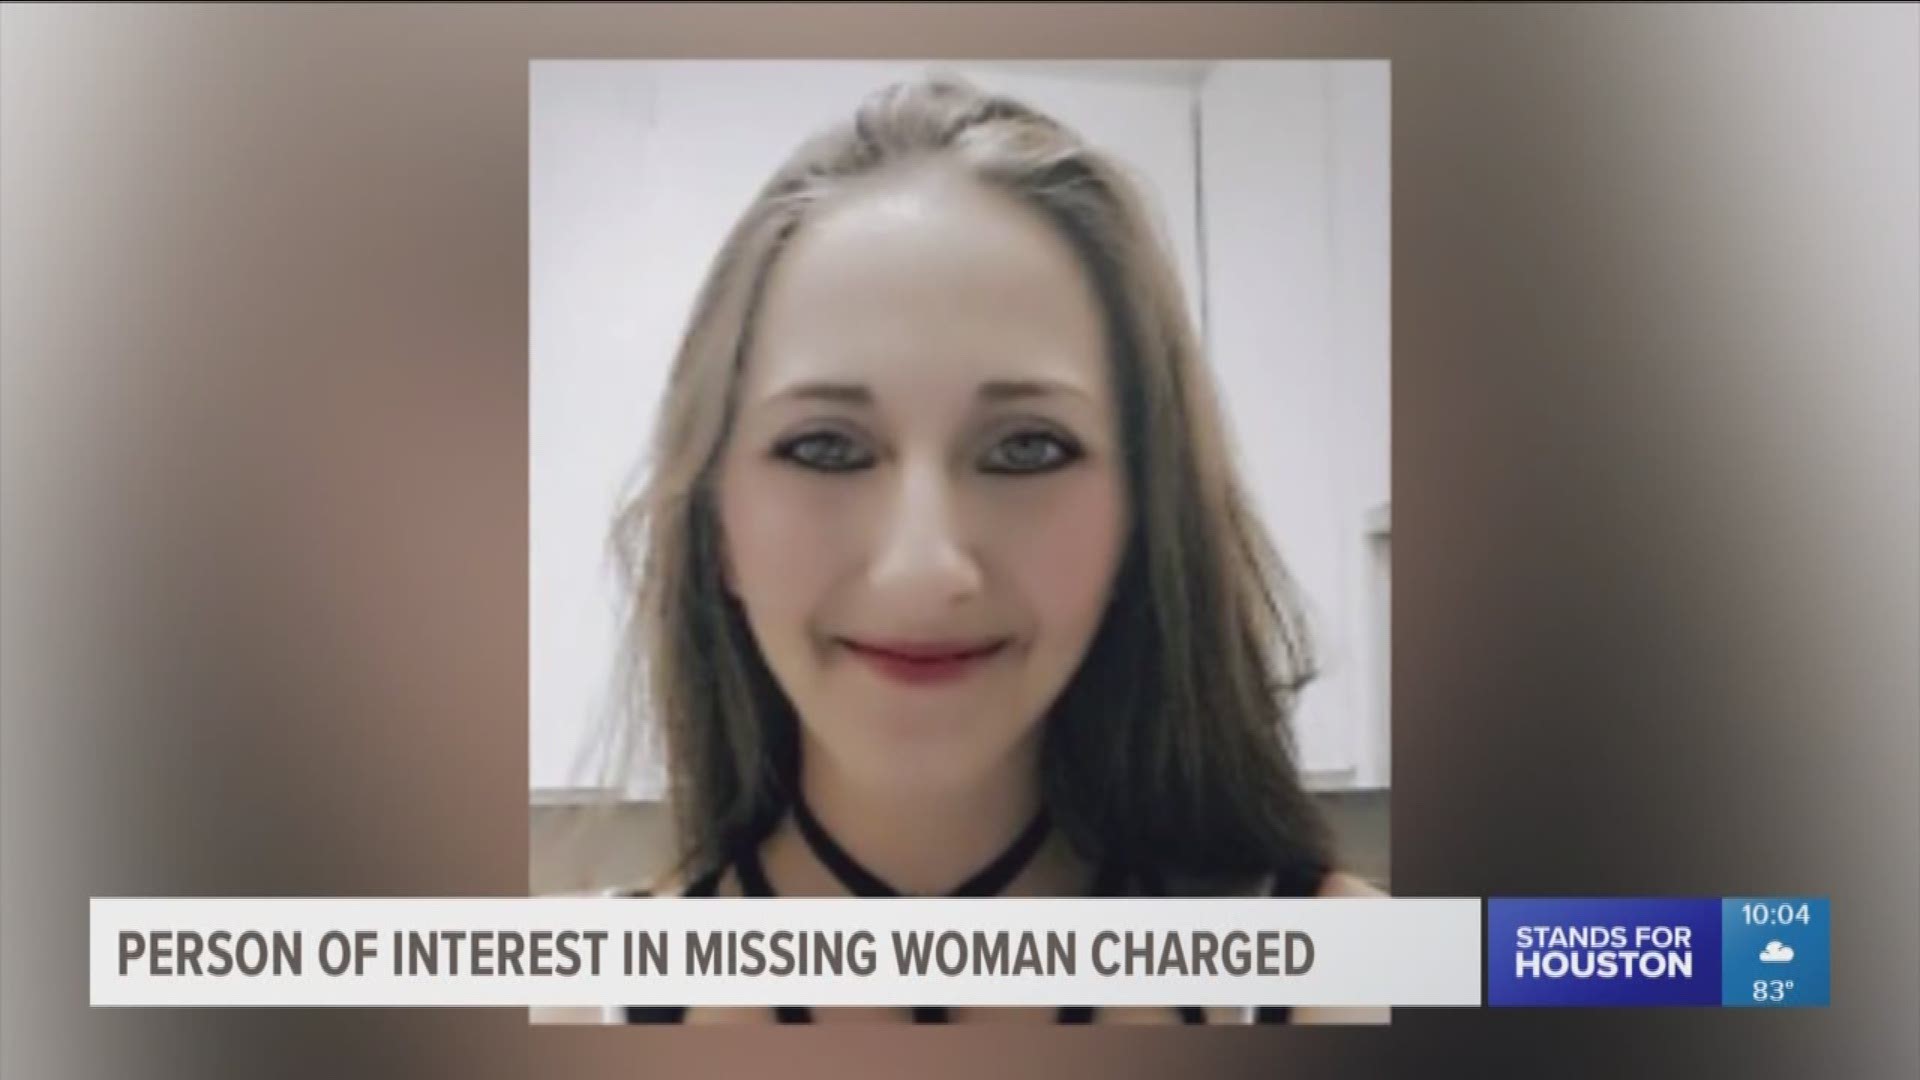 The Houston Police Department announced Monday afternoon Alex Haggerty has been charged with murder in the case of a 37-year-old woman who has been missing for three weeks and still has not been found. 